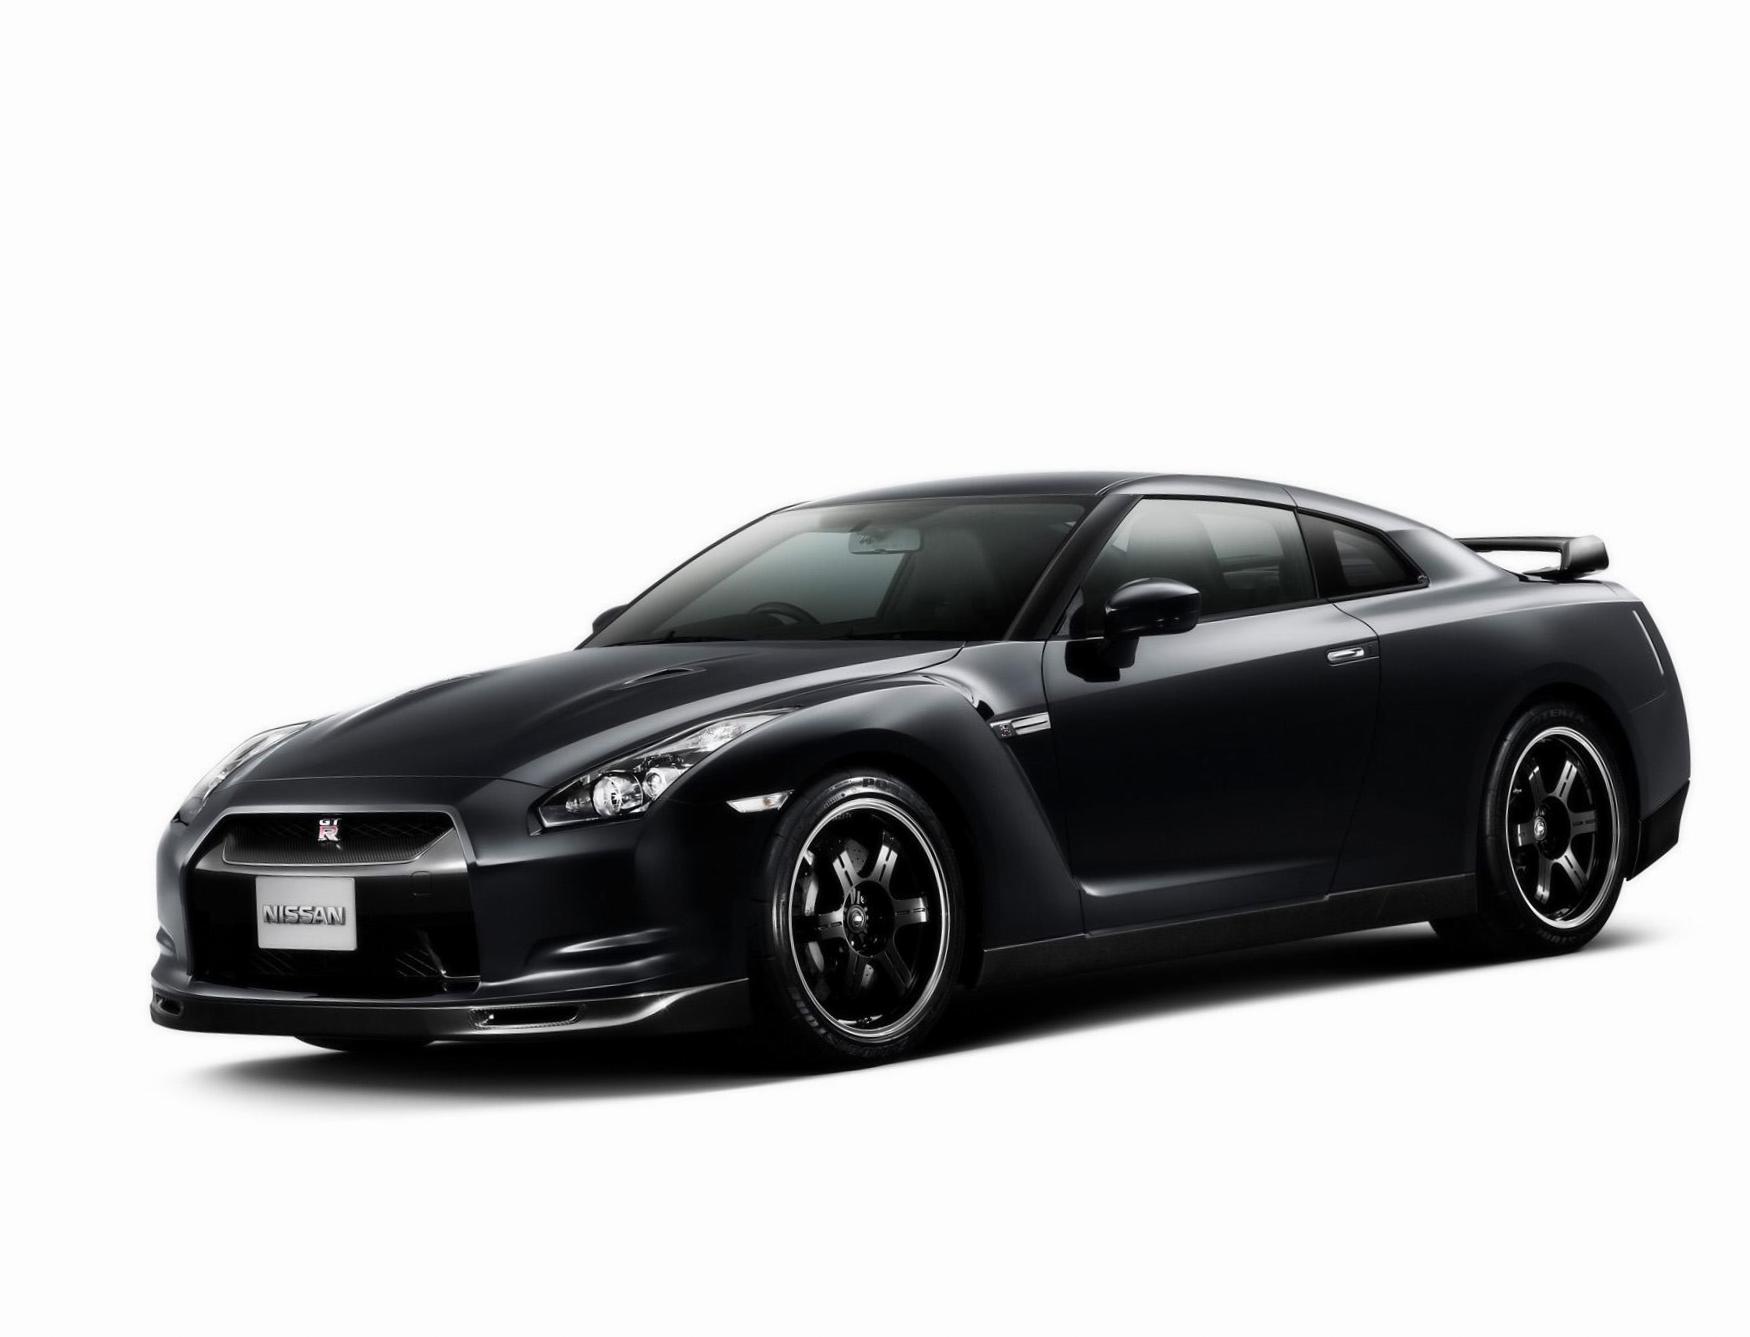 Nissan GT-R prices 2008